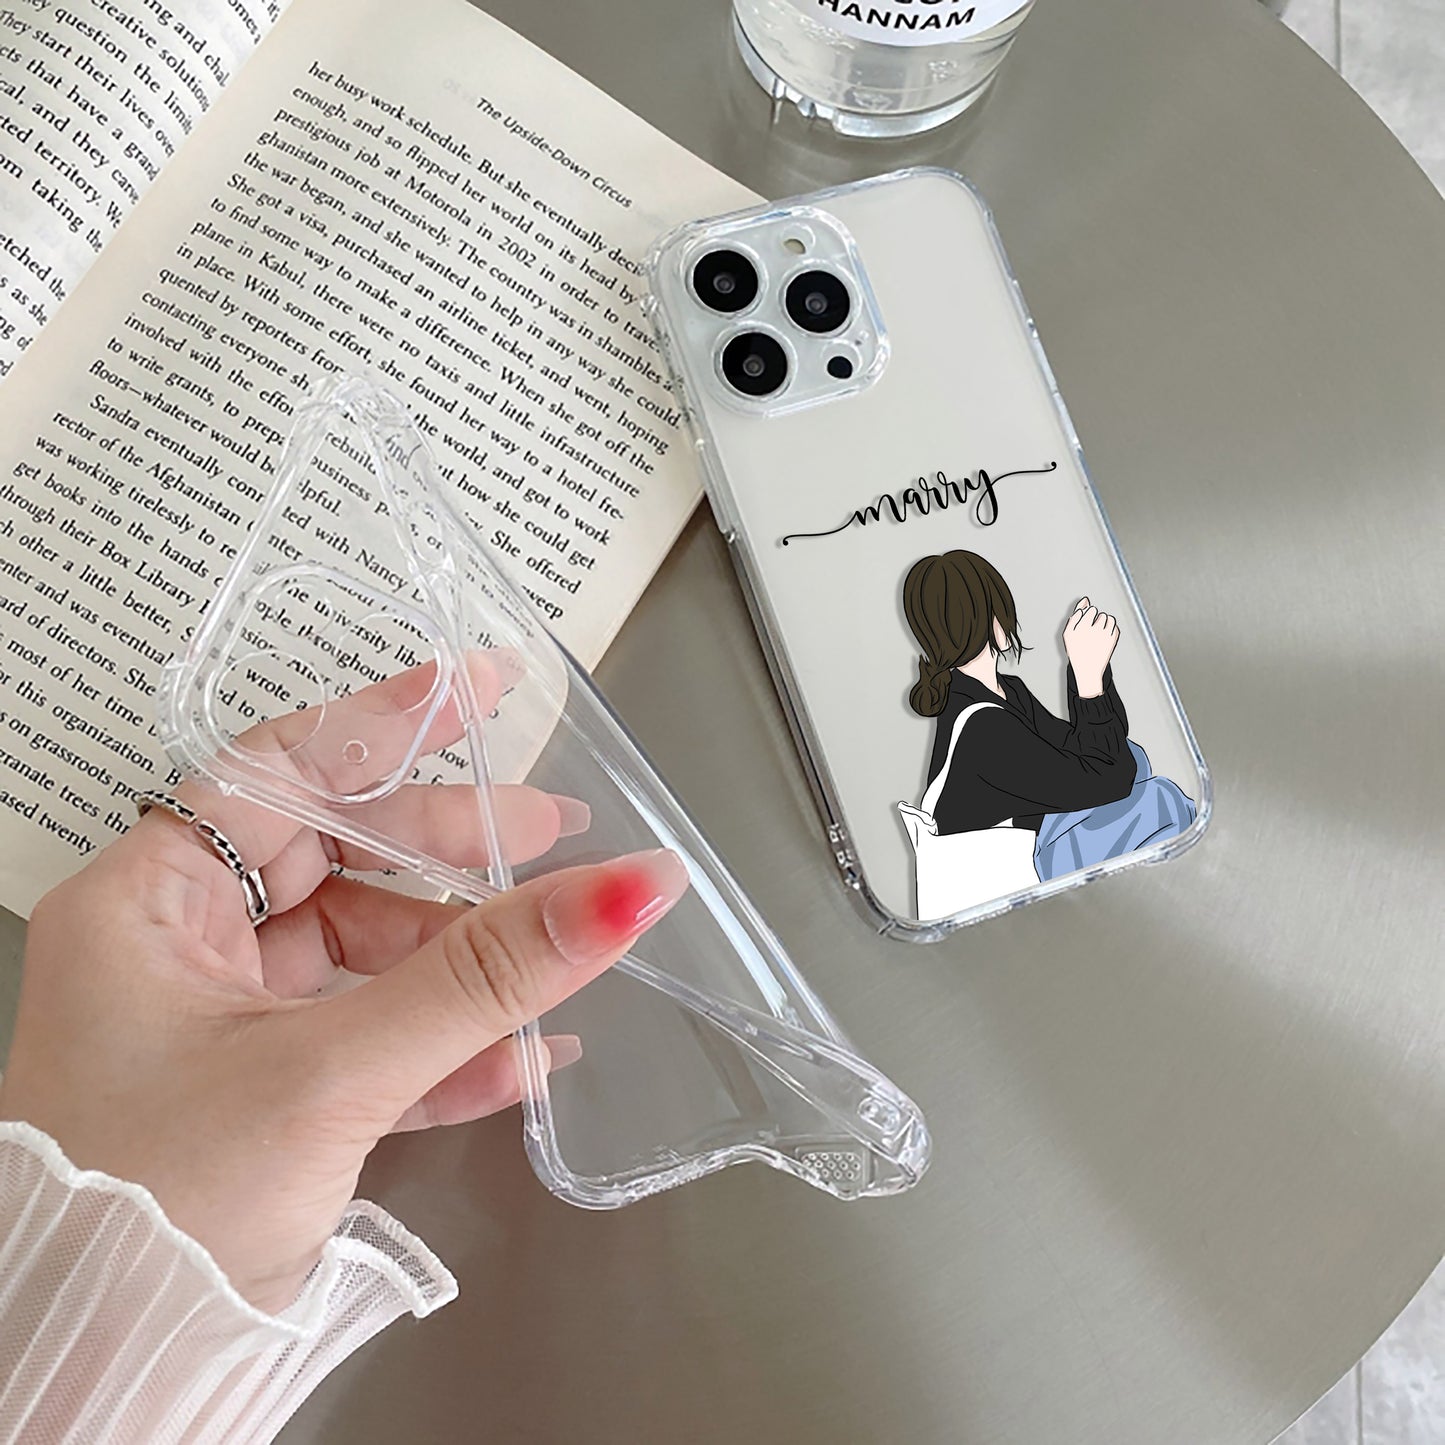 Relax Mood Customize Transparent Silicon Case For iPhone